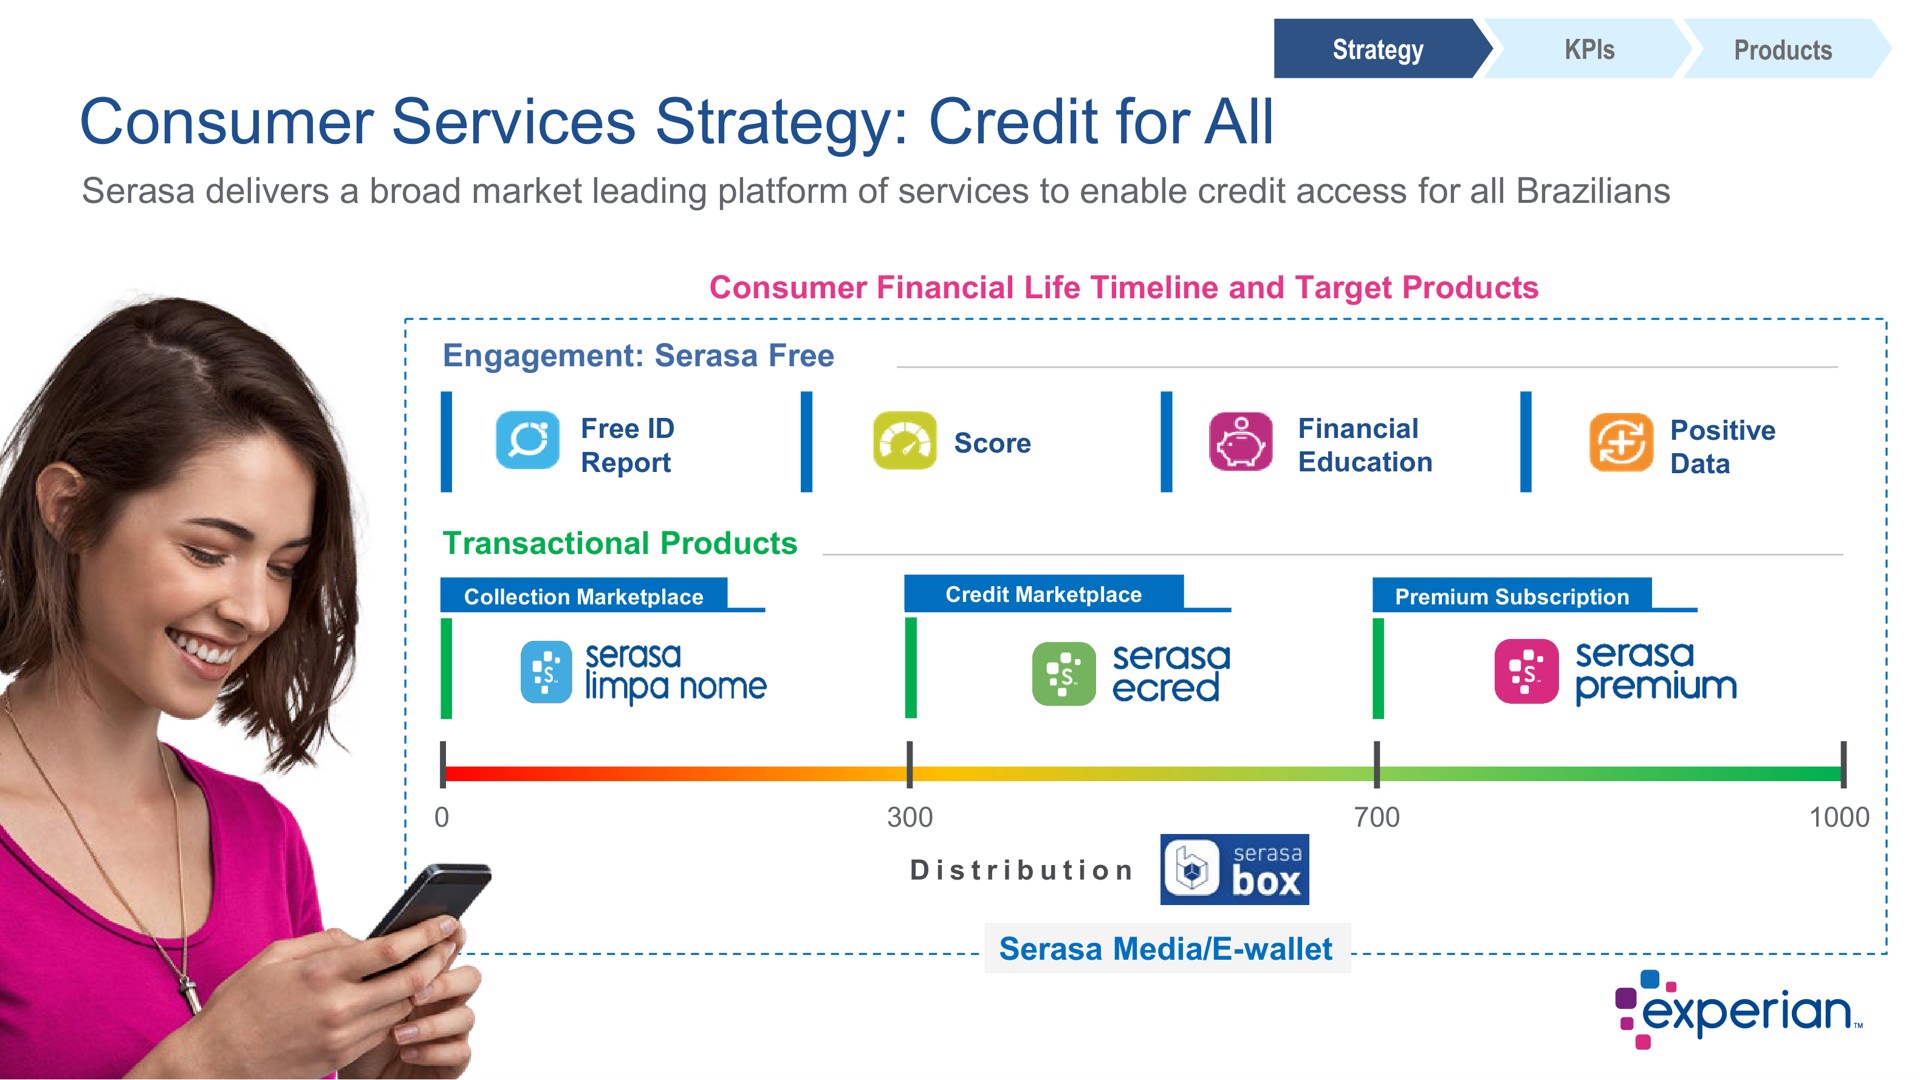 consumer services strategy credit for all | Experian